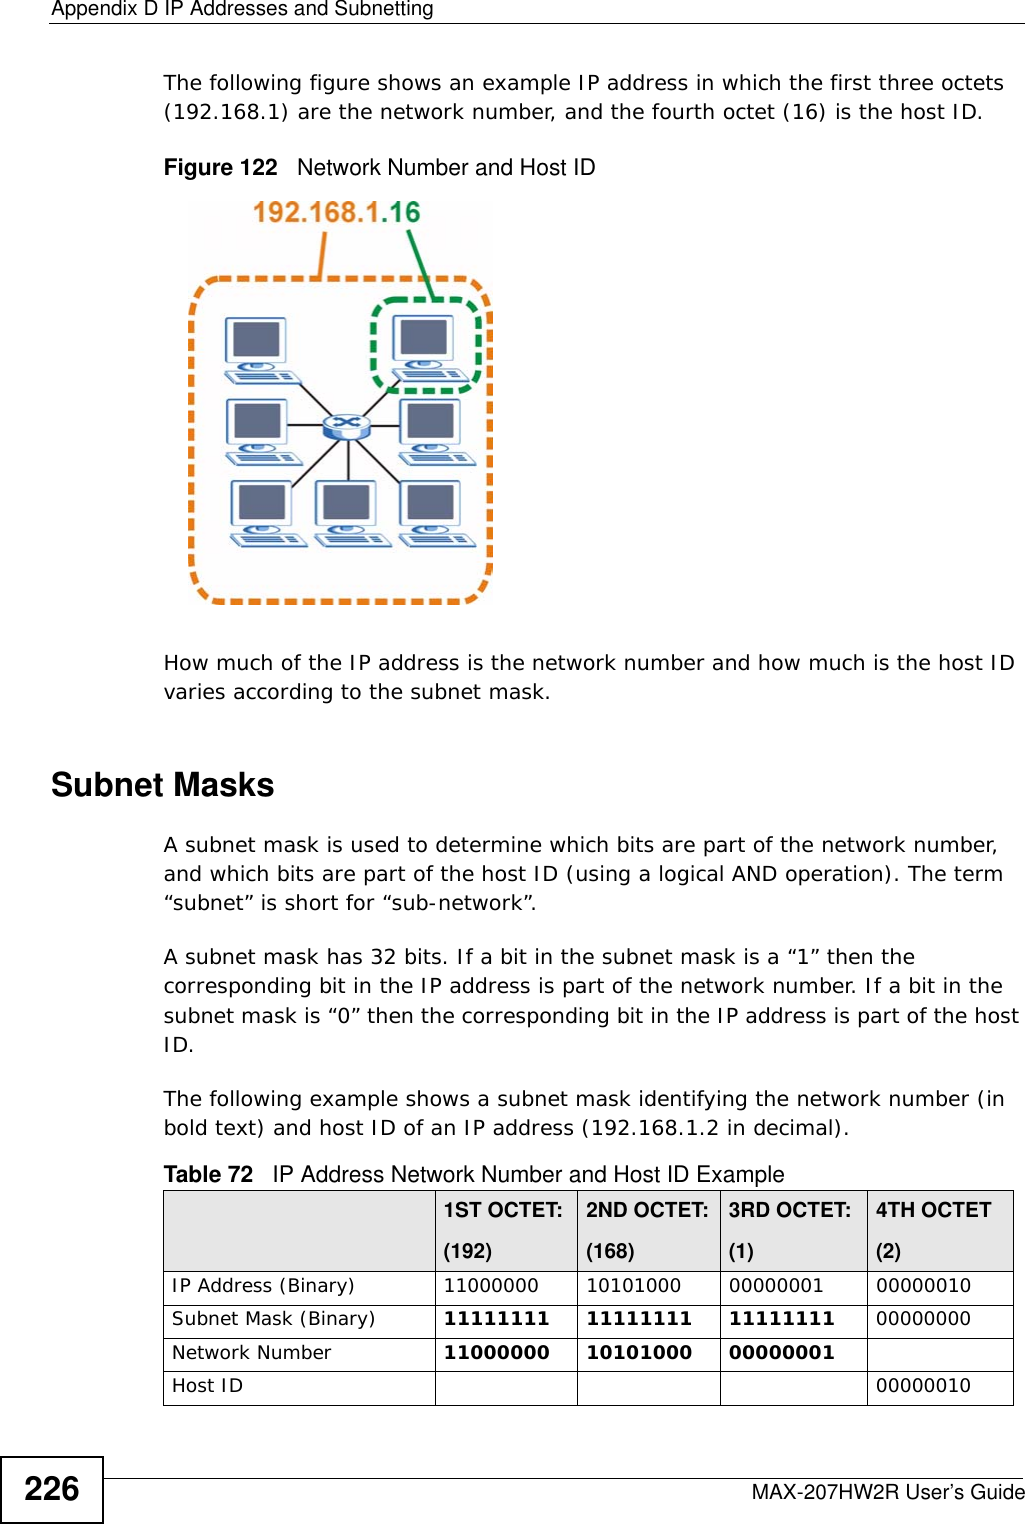 Appendix D IP Addresses and SubnettingMAX-207HW2R User’s Guide226The following figure shows an example IP address in which the first three octets (192.168.1) are the network number, and the fourth octet (16) is the host ID.Figure 122   Network Number and Host IDHow much of the IP address is the network number and how much is the host ID varies according to the subnet mask.  Subnet MasksA subnet mask is used to determine which bits are part of the network number, and which bits are part of the host ID (using a logical AND operation). The term “subnet” is short for “sub-network”.A subnet mask has 32 bits. If a bit in the subnet mask is a “1” then the corresponding bit in the IP address is part of the network number. If a bit in the subnet mask is “0” then the corresponding bit in the IP address is part of the host ID. The following example shows a subnet mask identifying the network number (in bold text) and host ID of an IP address (192.168.1.2 in decimal).Table 72   IP Address Network Number and Host ID Example1ST OCTET:(192)2ND OCTET:(168)3RD OCTET:(1)4TH OCTET(2)IP Address (Binary) 11000000 10101000 00000001 00000010Subnet Mask (Binary) 11111111 11111111 11111111 00000000Network Number 11000000 10101000 00000001Host ID 00000010